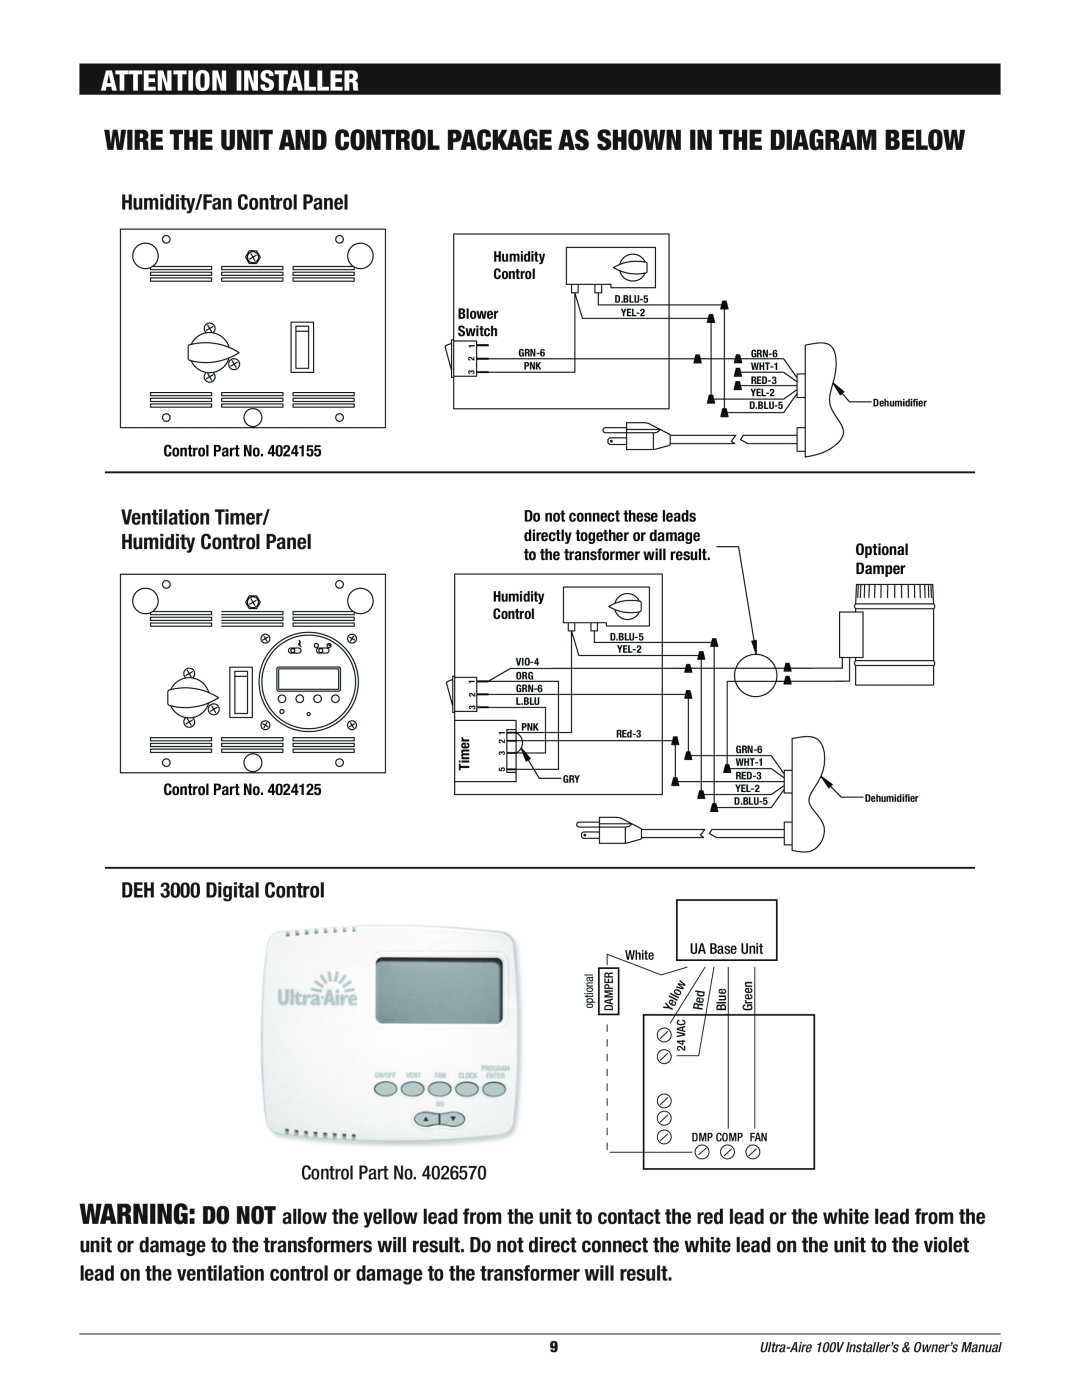 Therma-Stor Products Group Ultra-Aire 100V Attention Installer, Humidity/Fan Control Panel, DEH 3000 Digital Control 